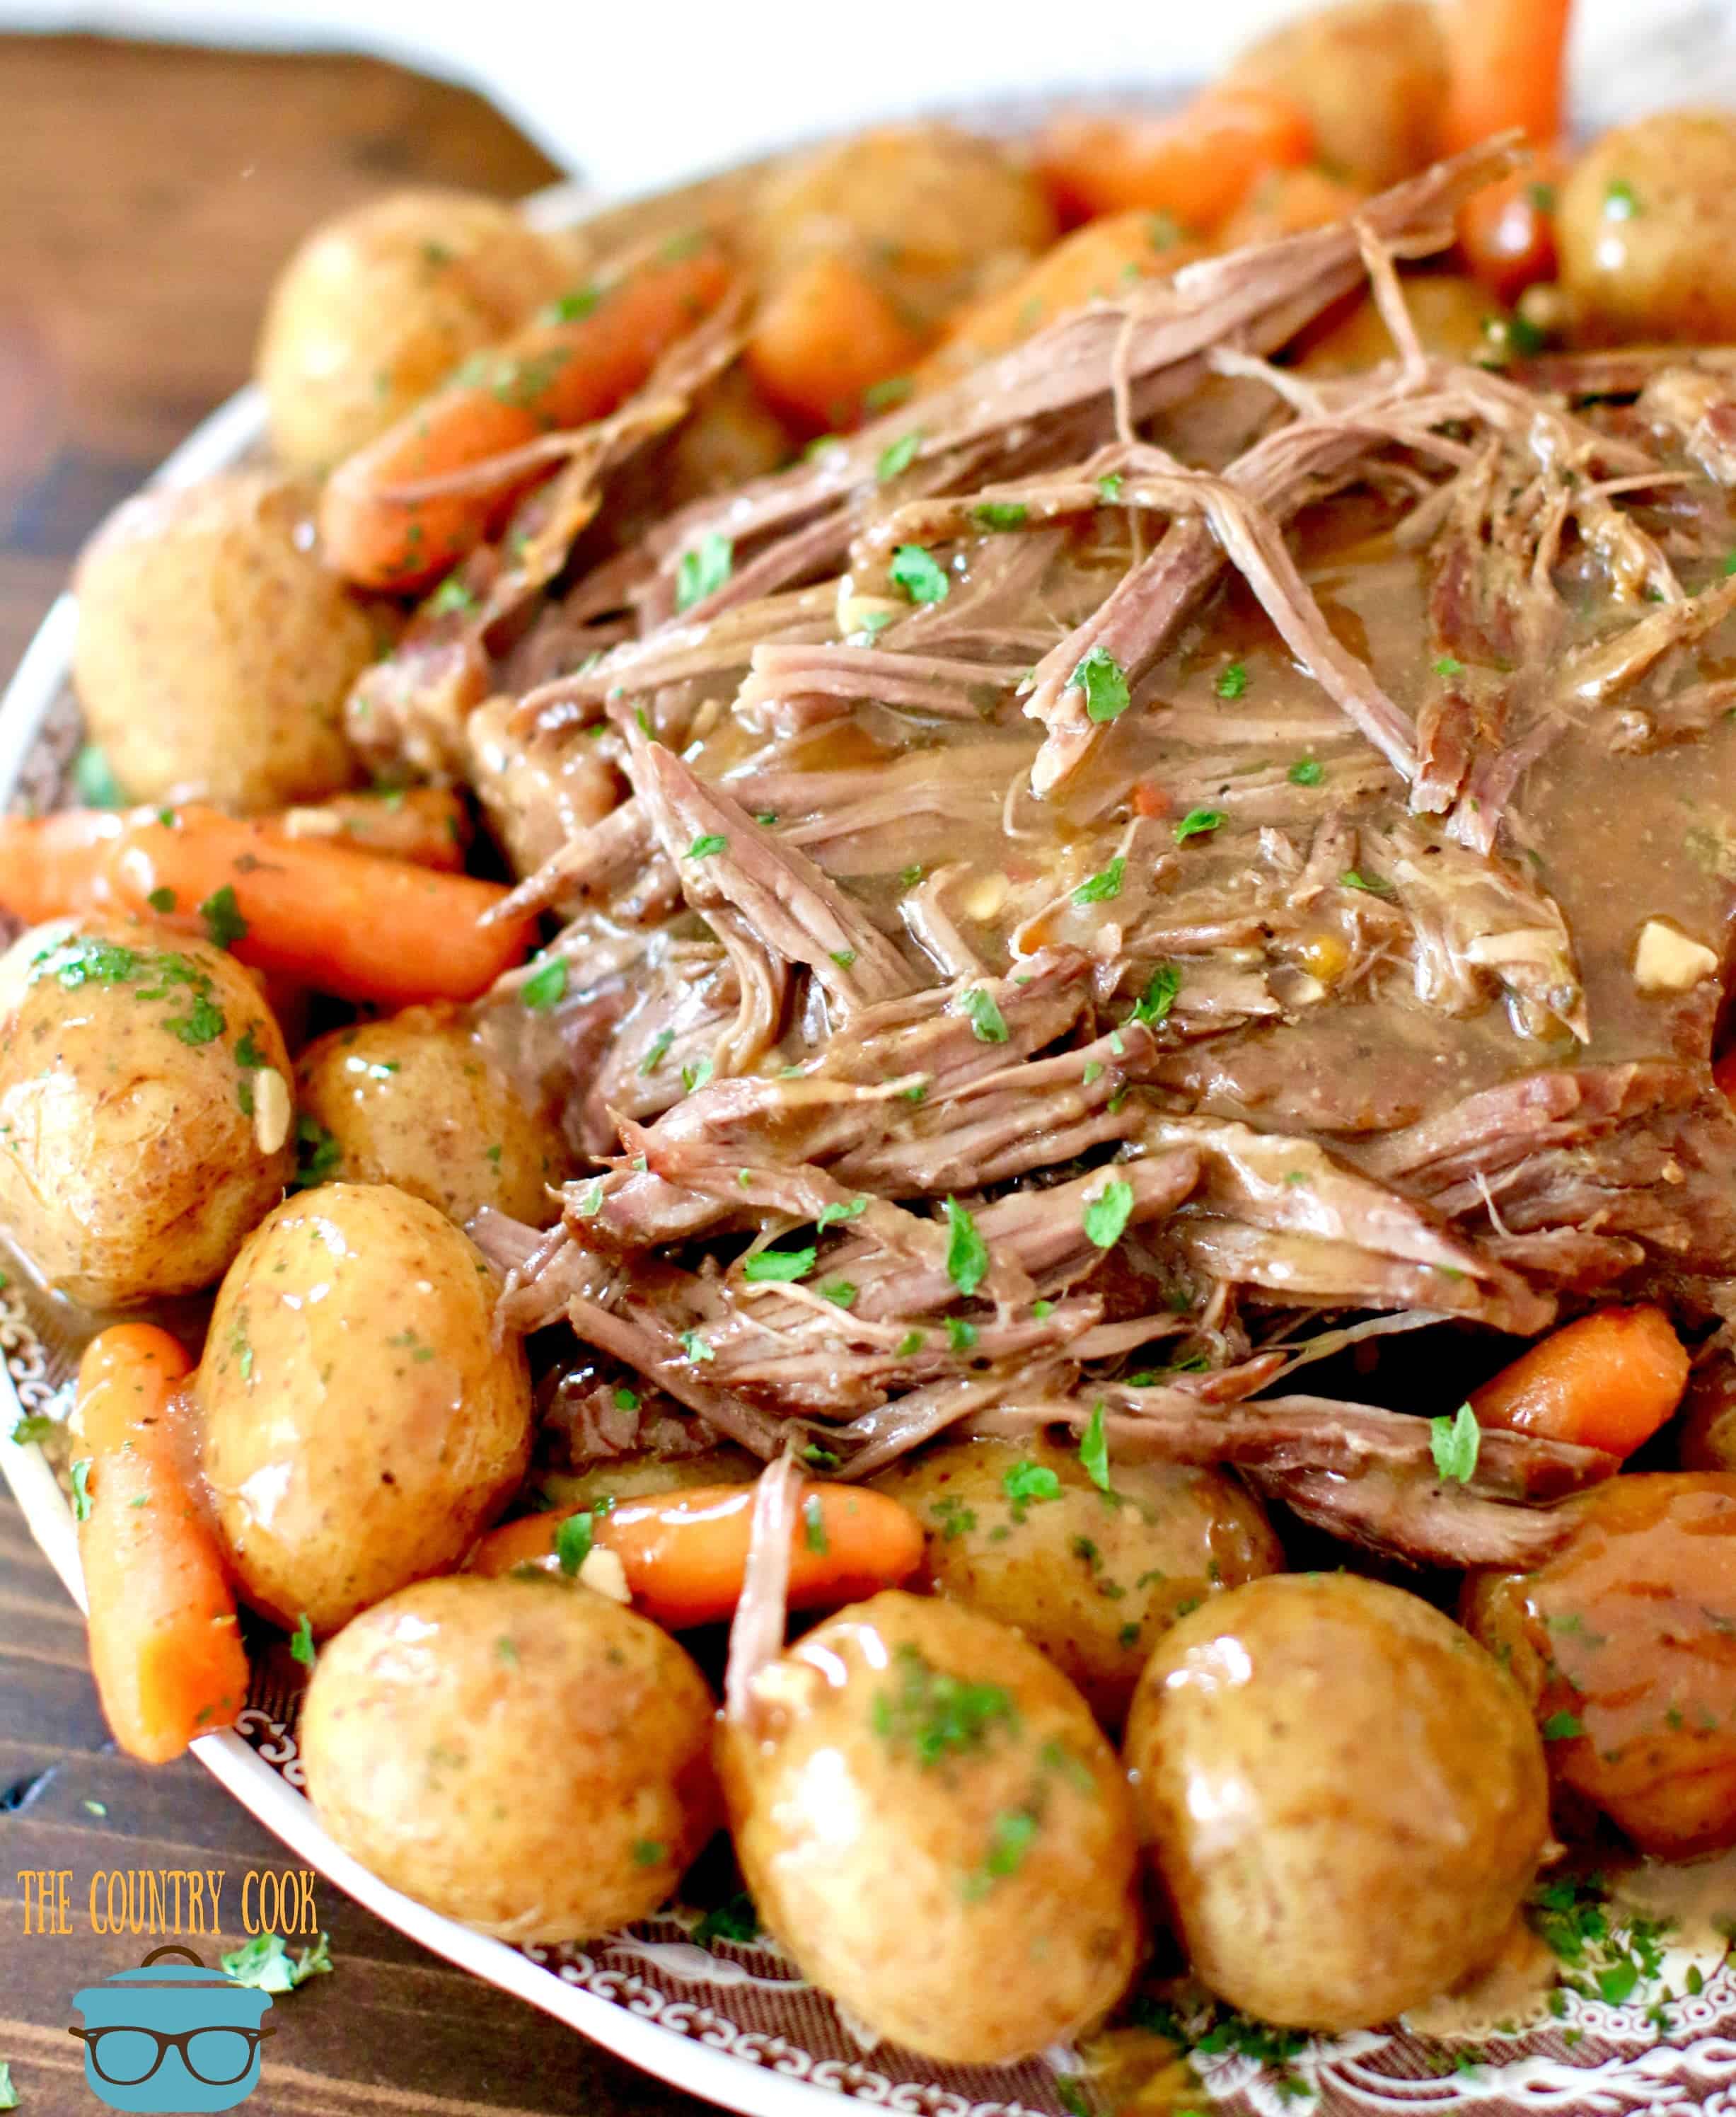 Perfect Instant Pot Roast with gravy shown on a brown and white plate.